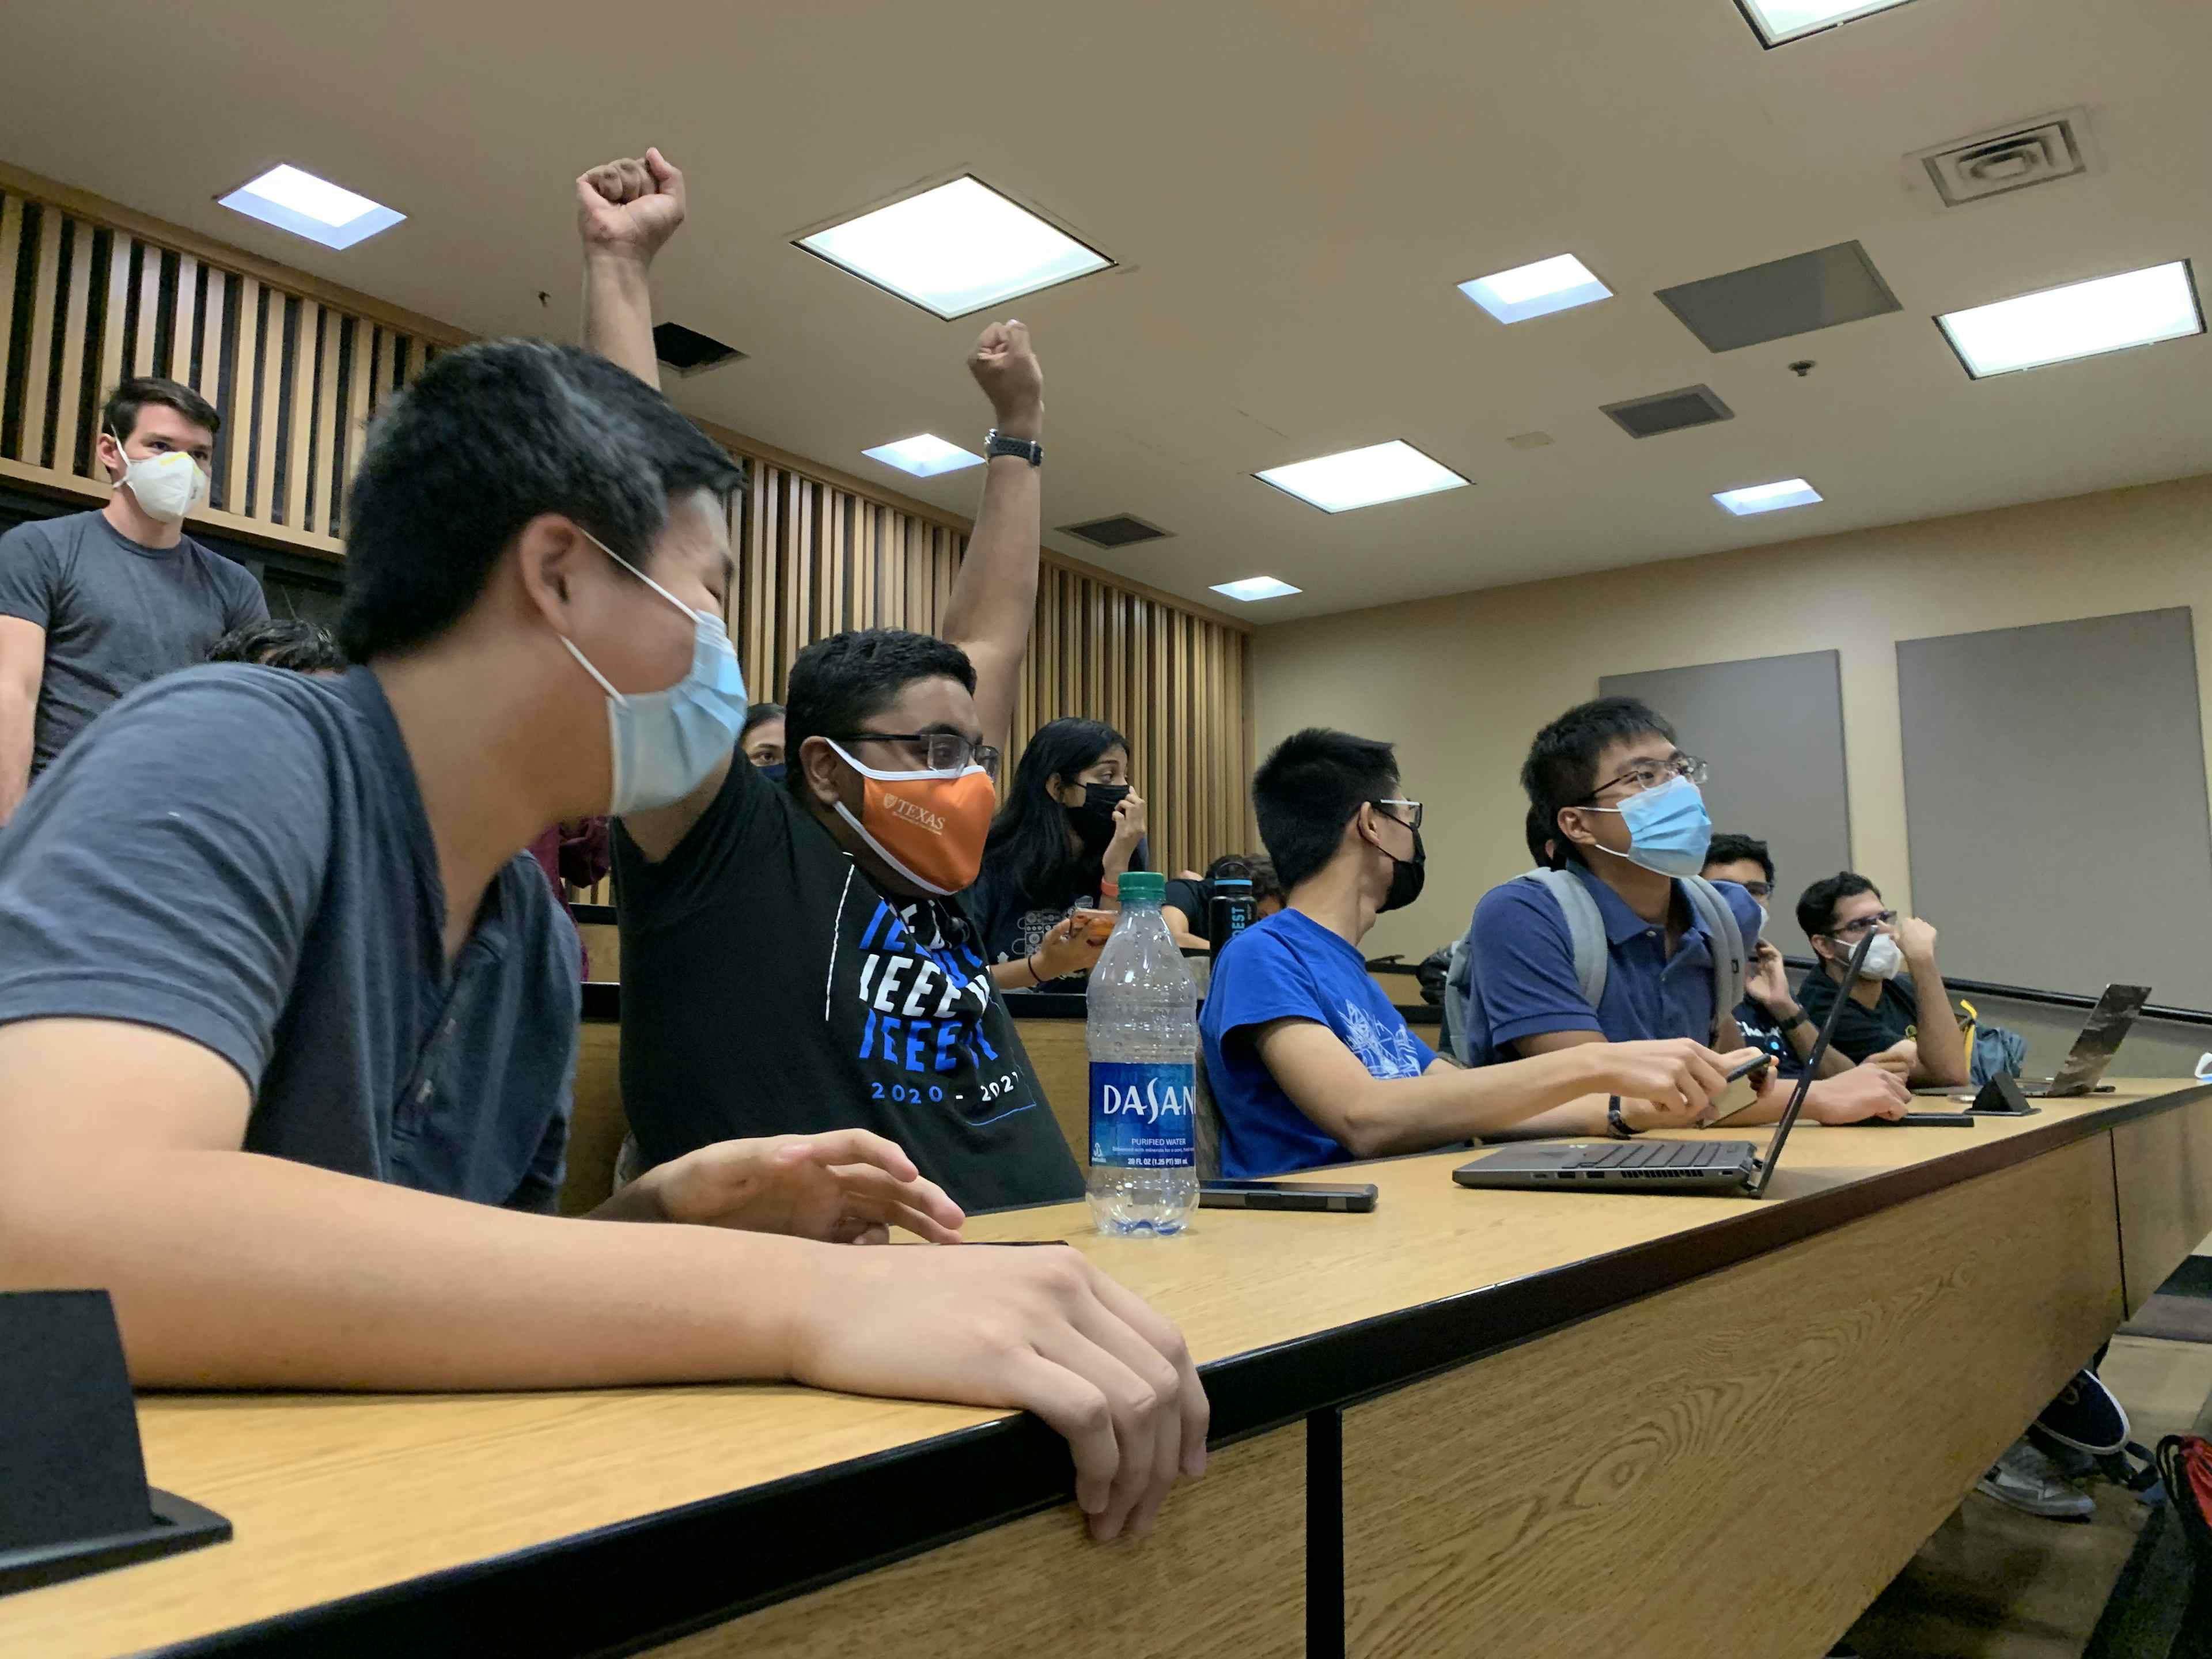 Members cheer and excited in lecture hall